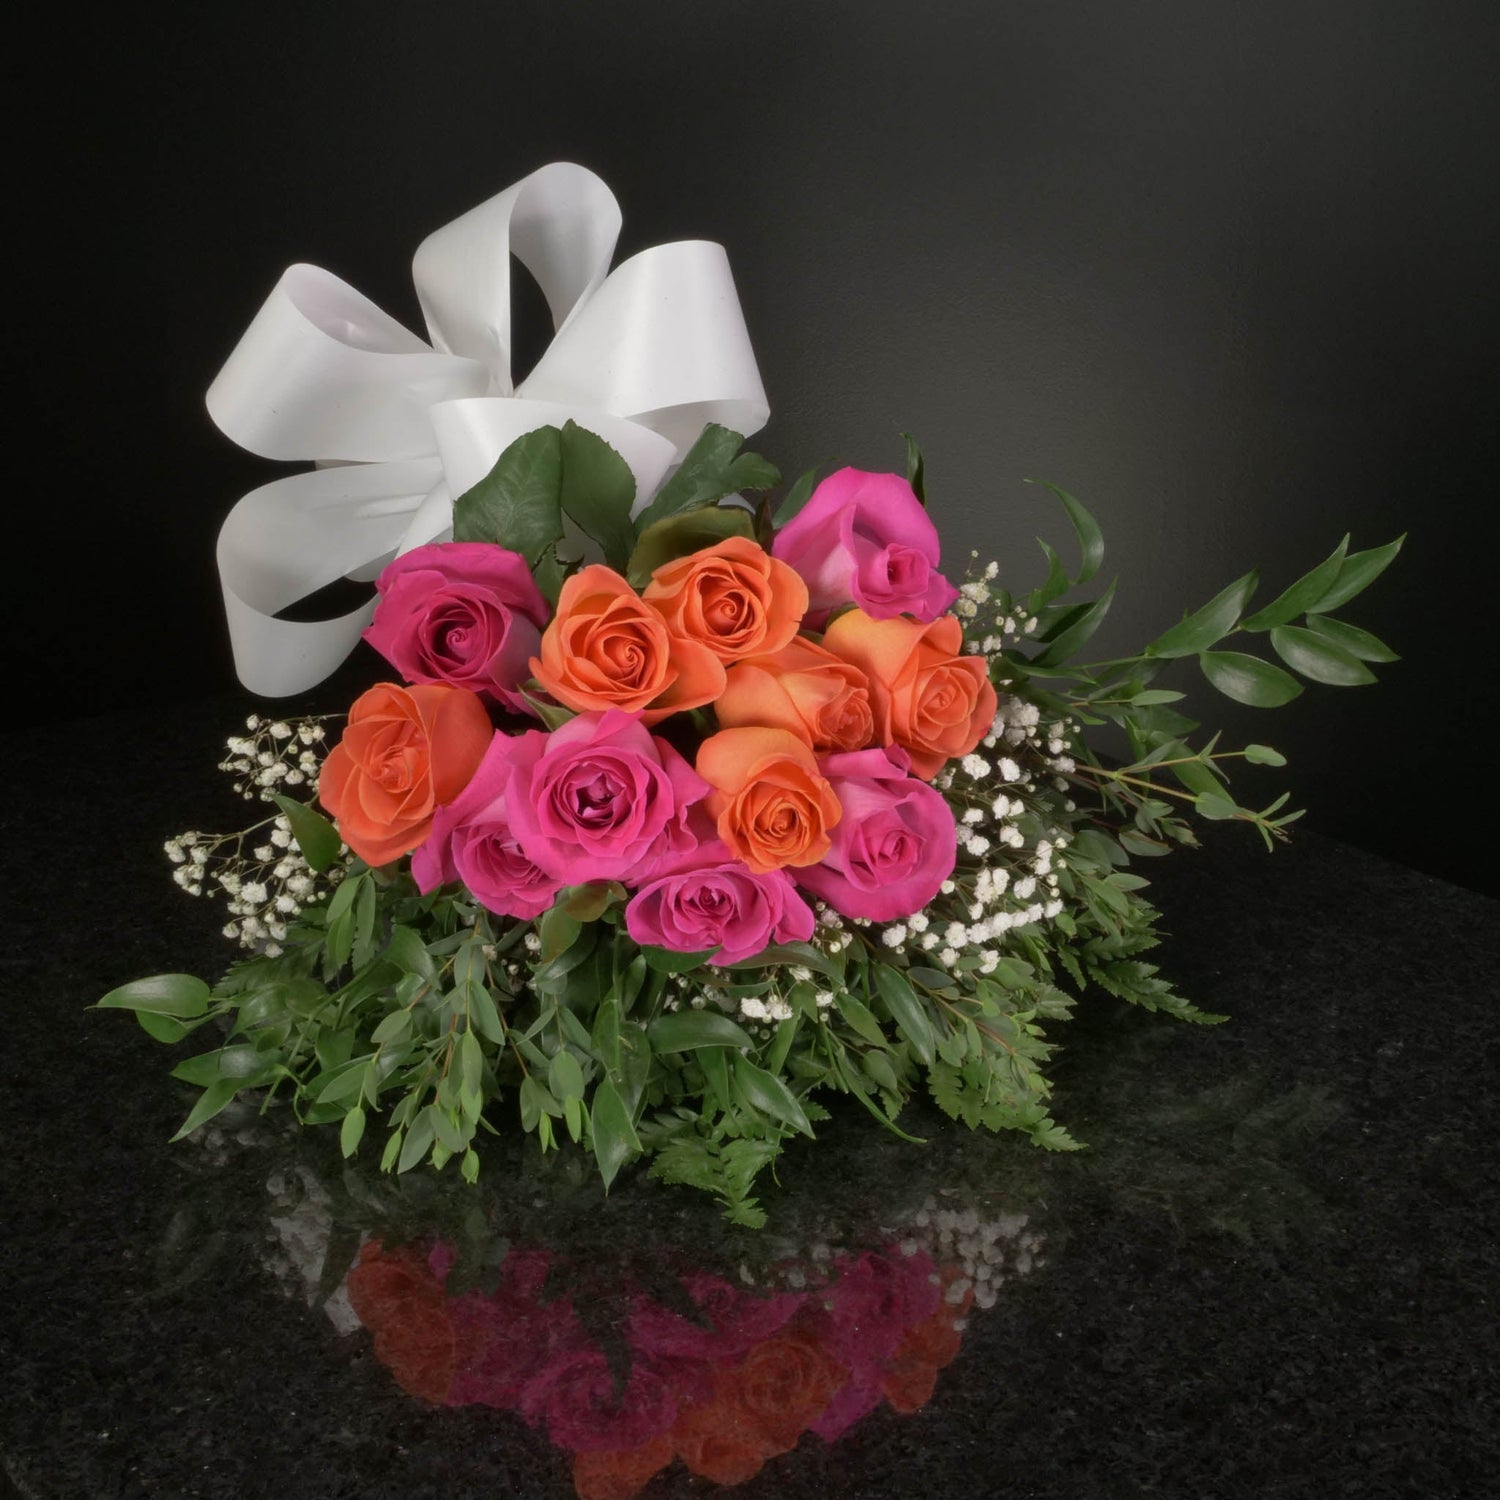  12 Roses / Hand-Tied / Fancy